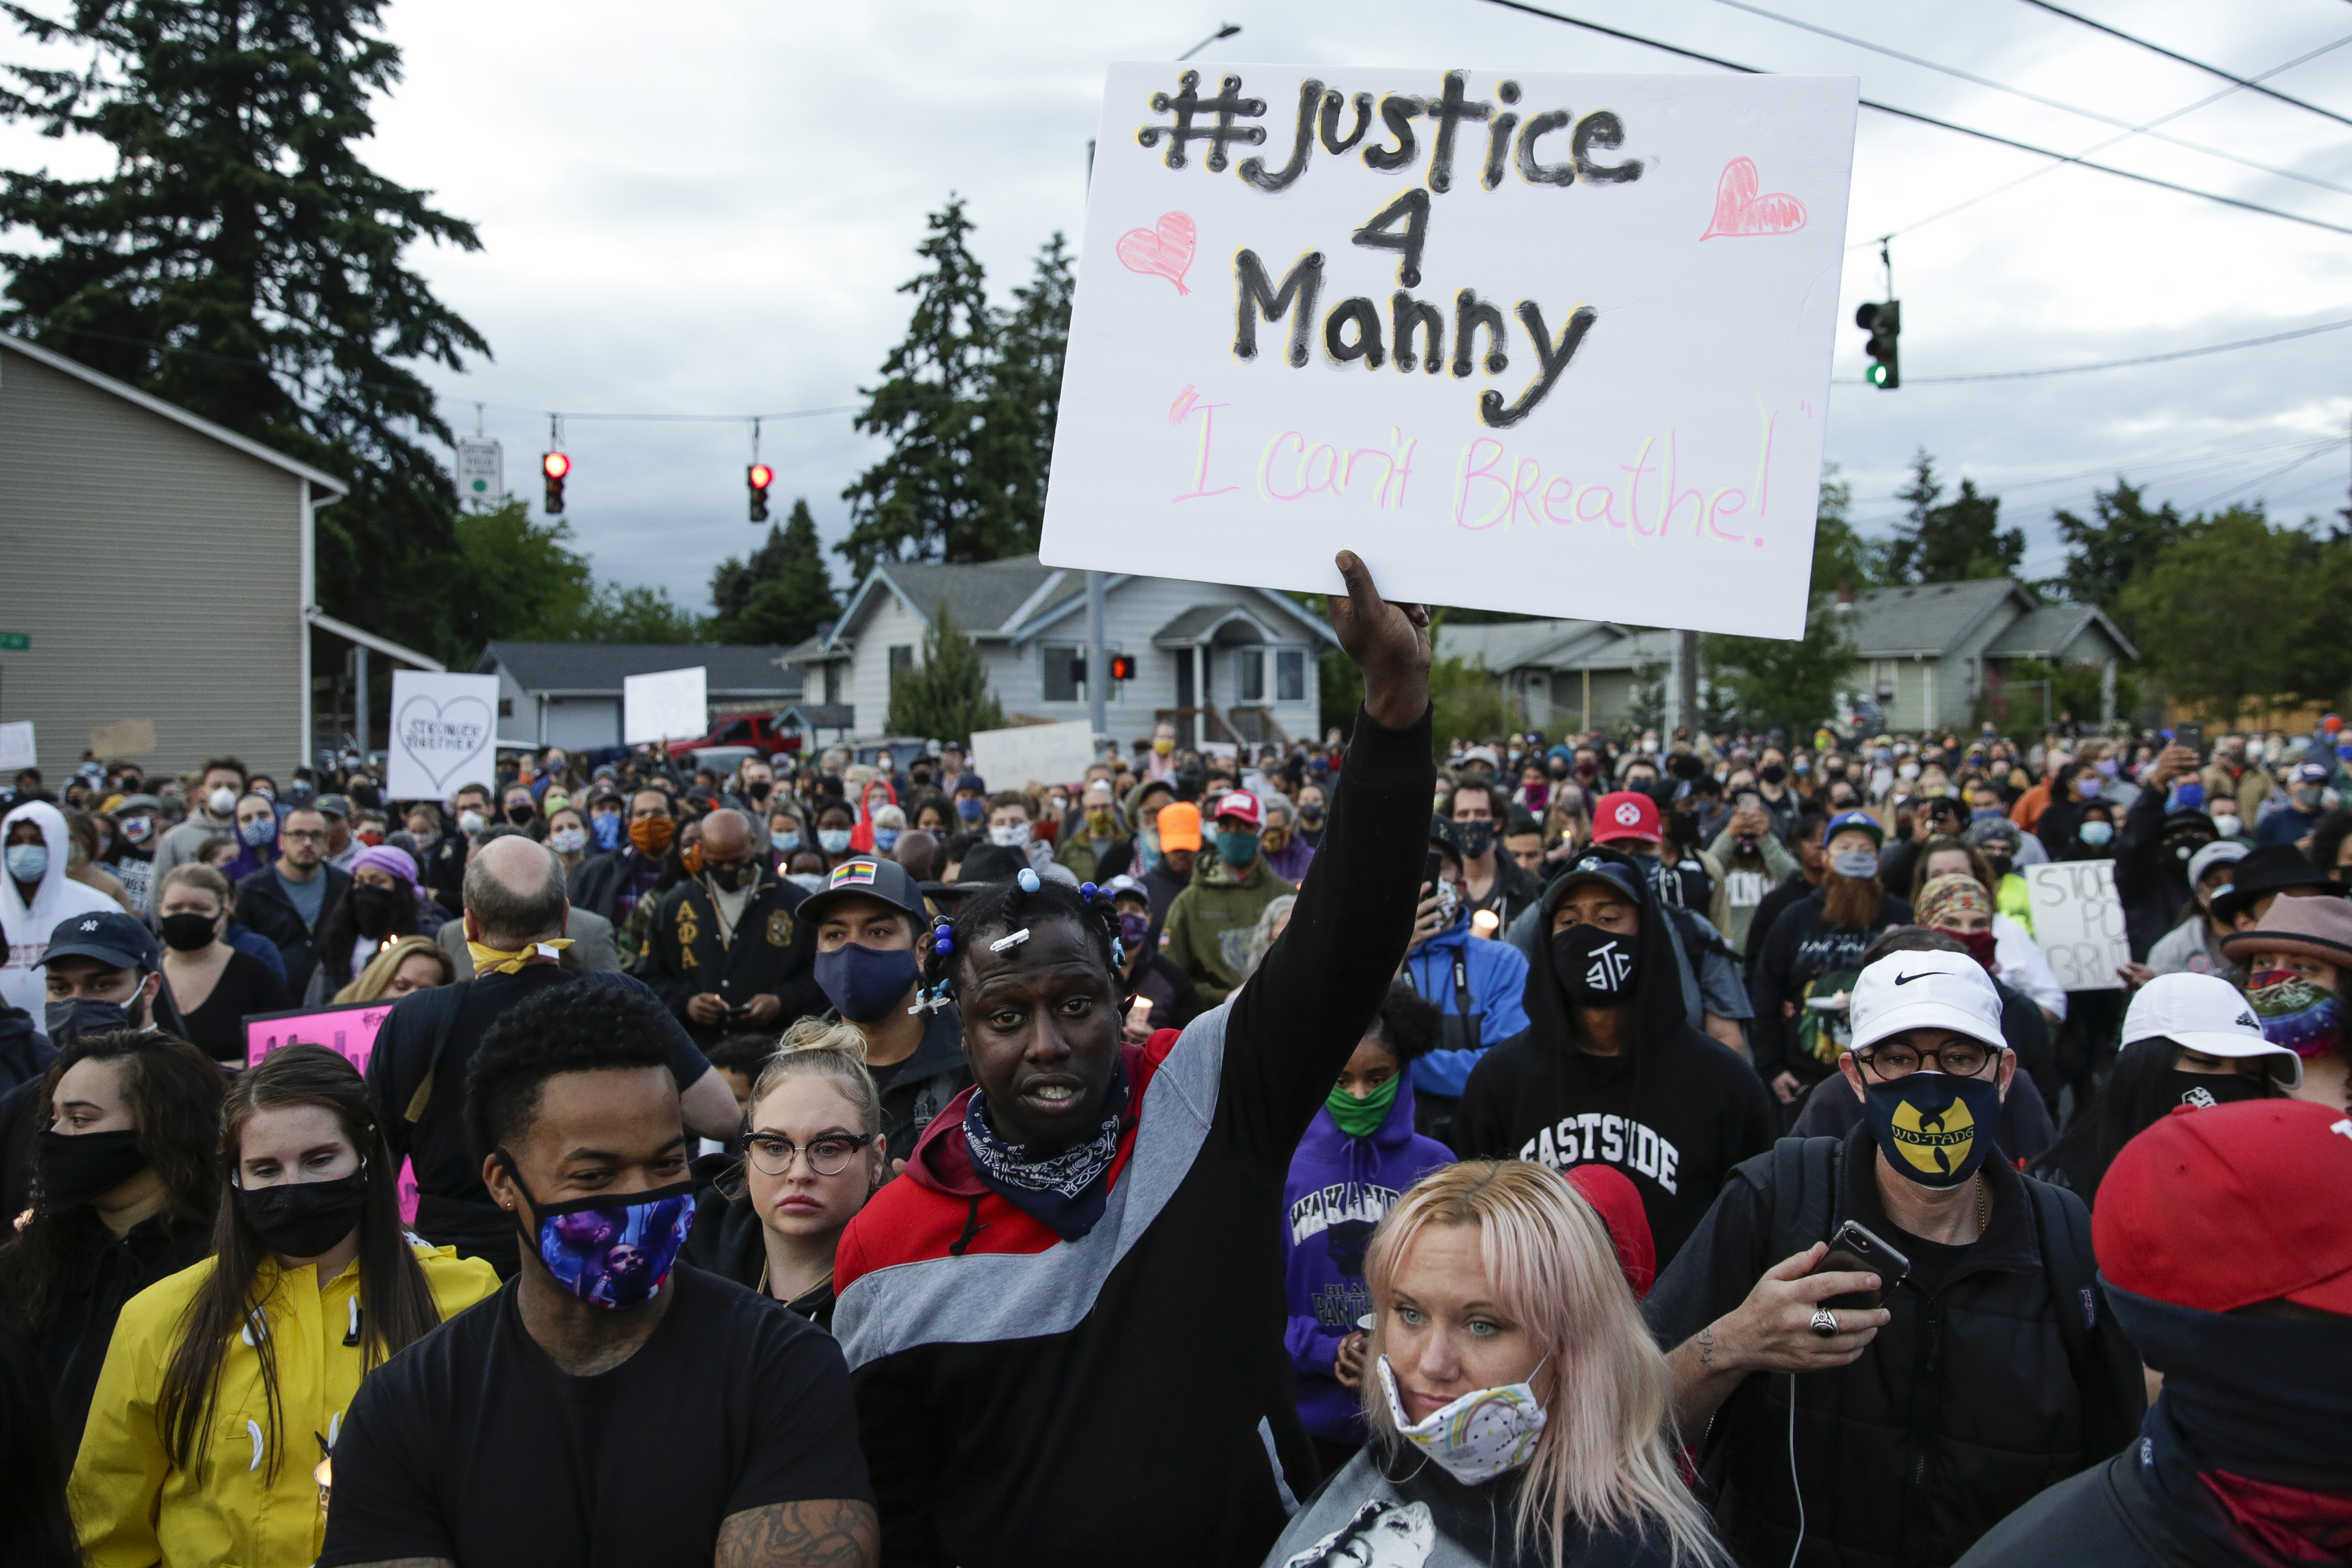 A diverse, masked crowd is packed onto a street under a cloudy sky. A black man with short braids stands at the front of the group, and raises a white sign with black letters and pink hearts reading, “#Justice 4 Manny.”